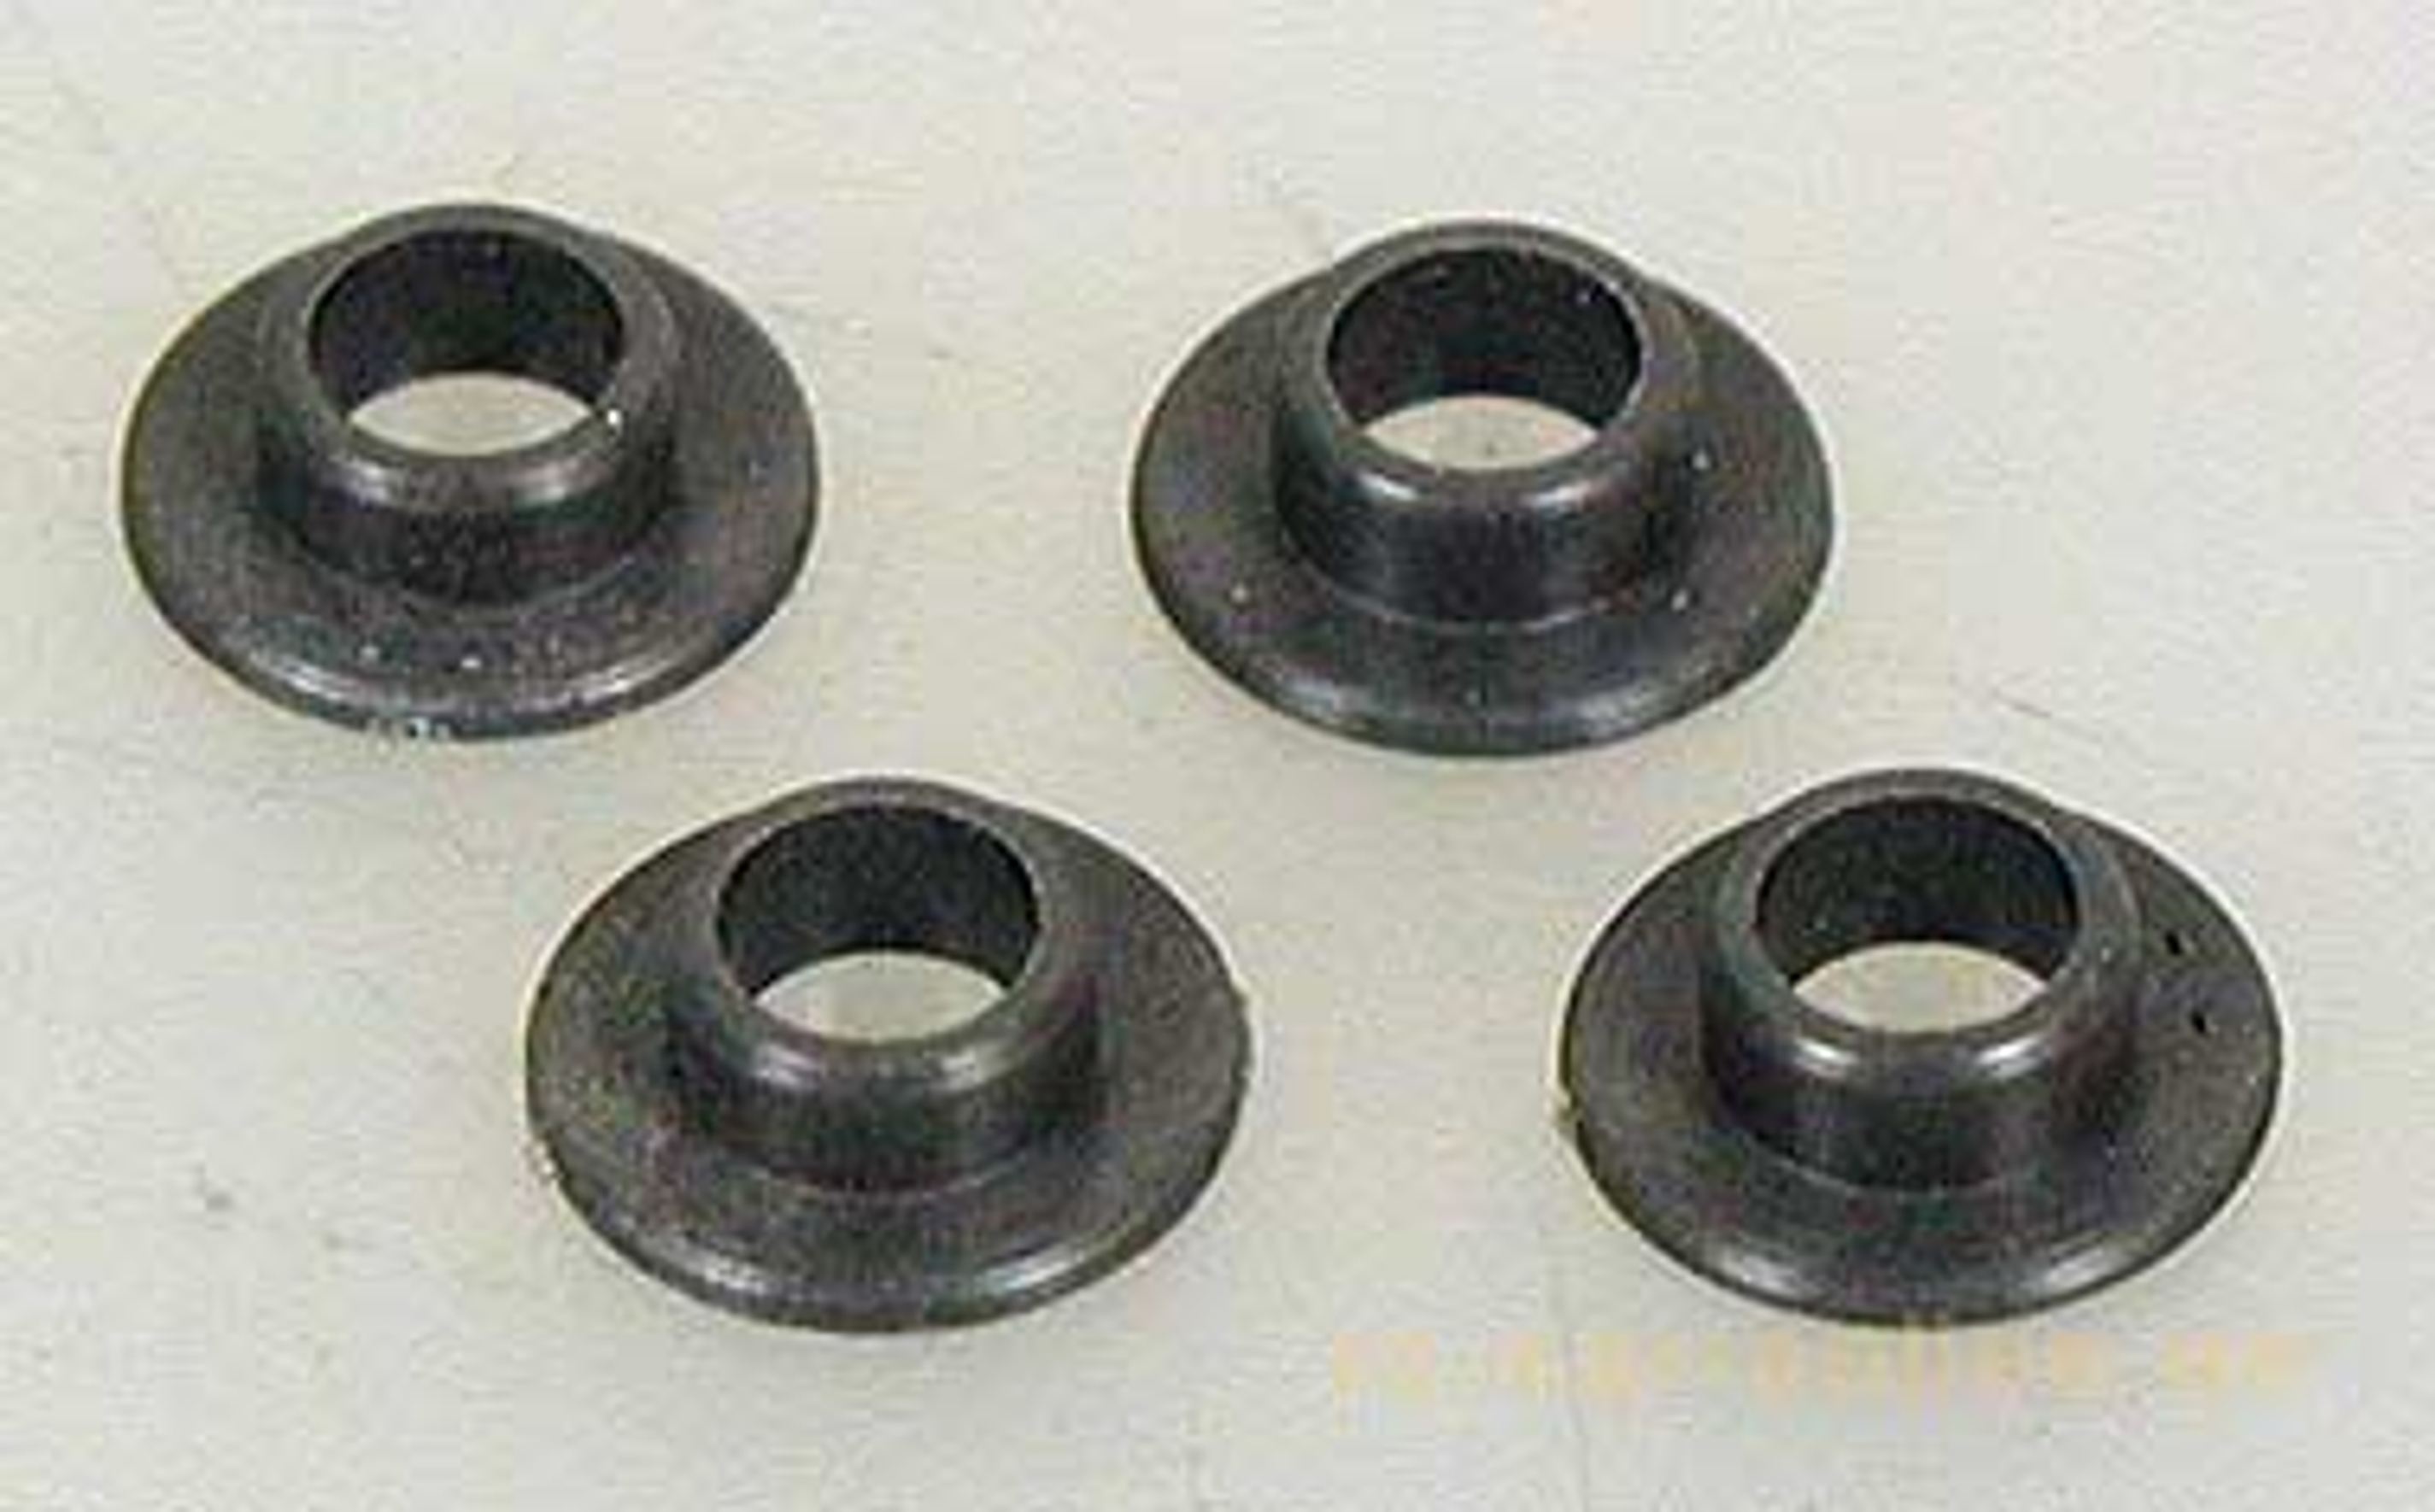 HT replacement flanged bushing 4 x 5.5, y1096, 4 pcs.